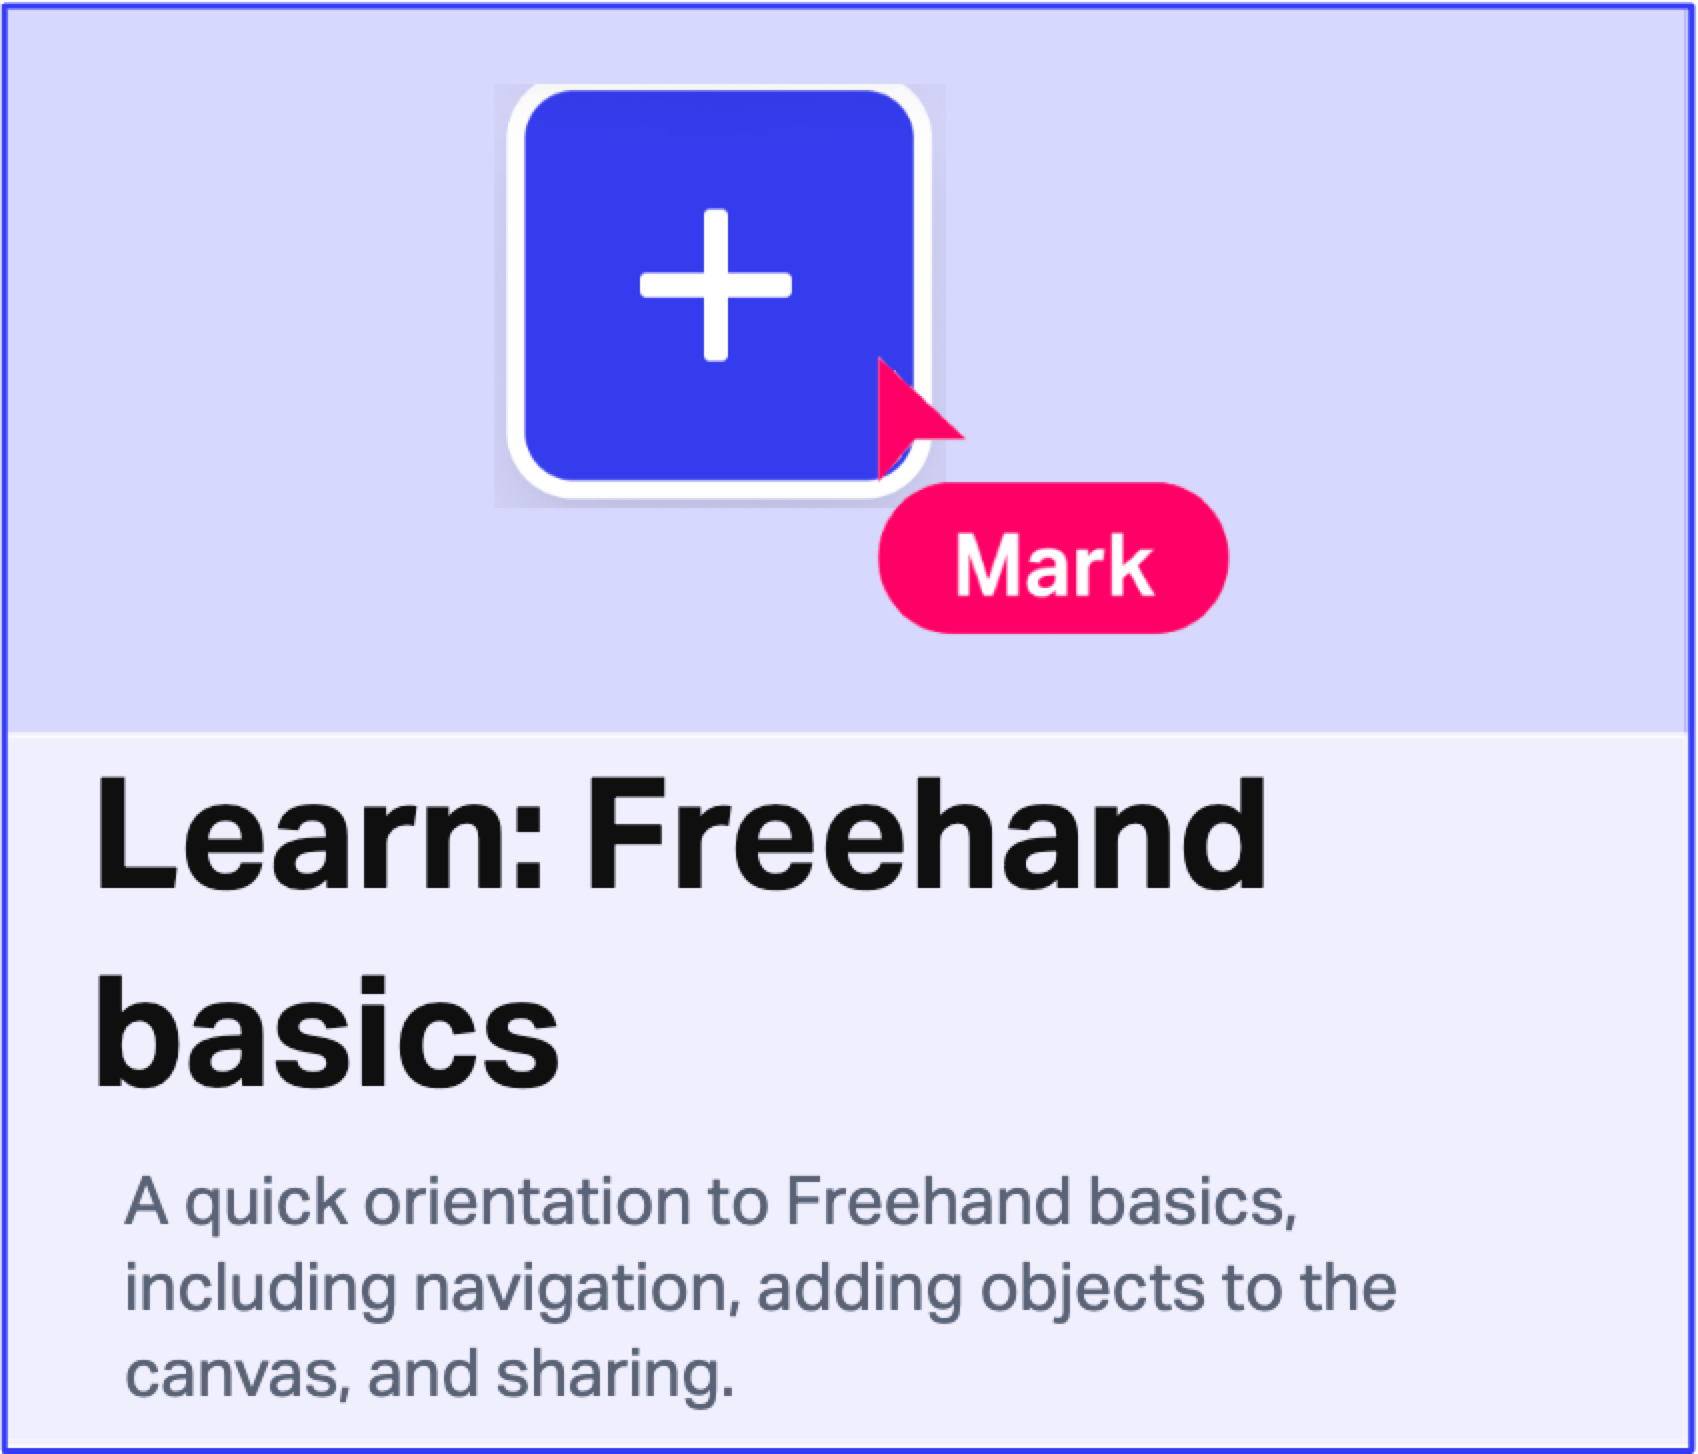 Template to learn the basics of Freehand